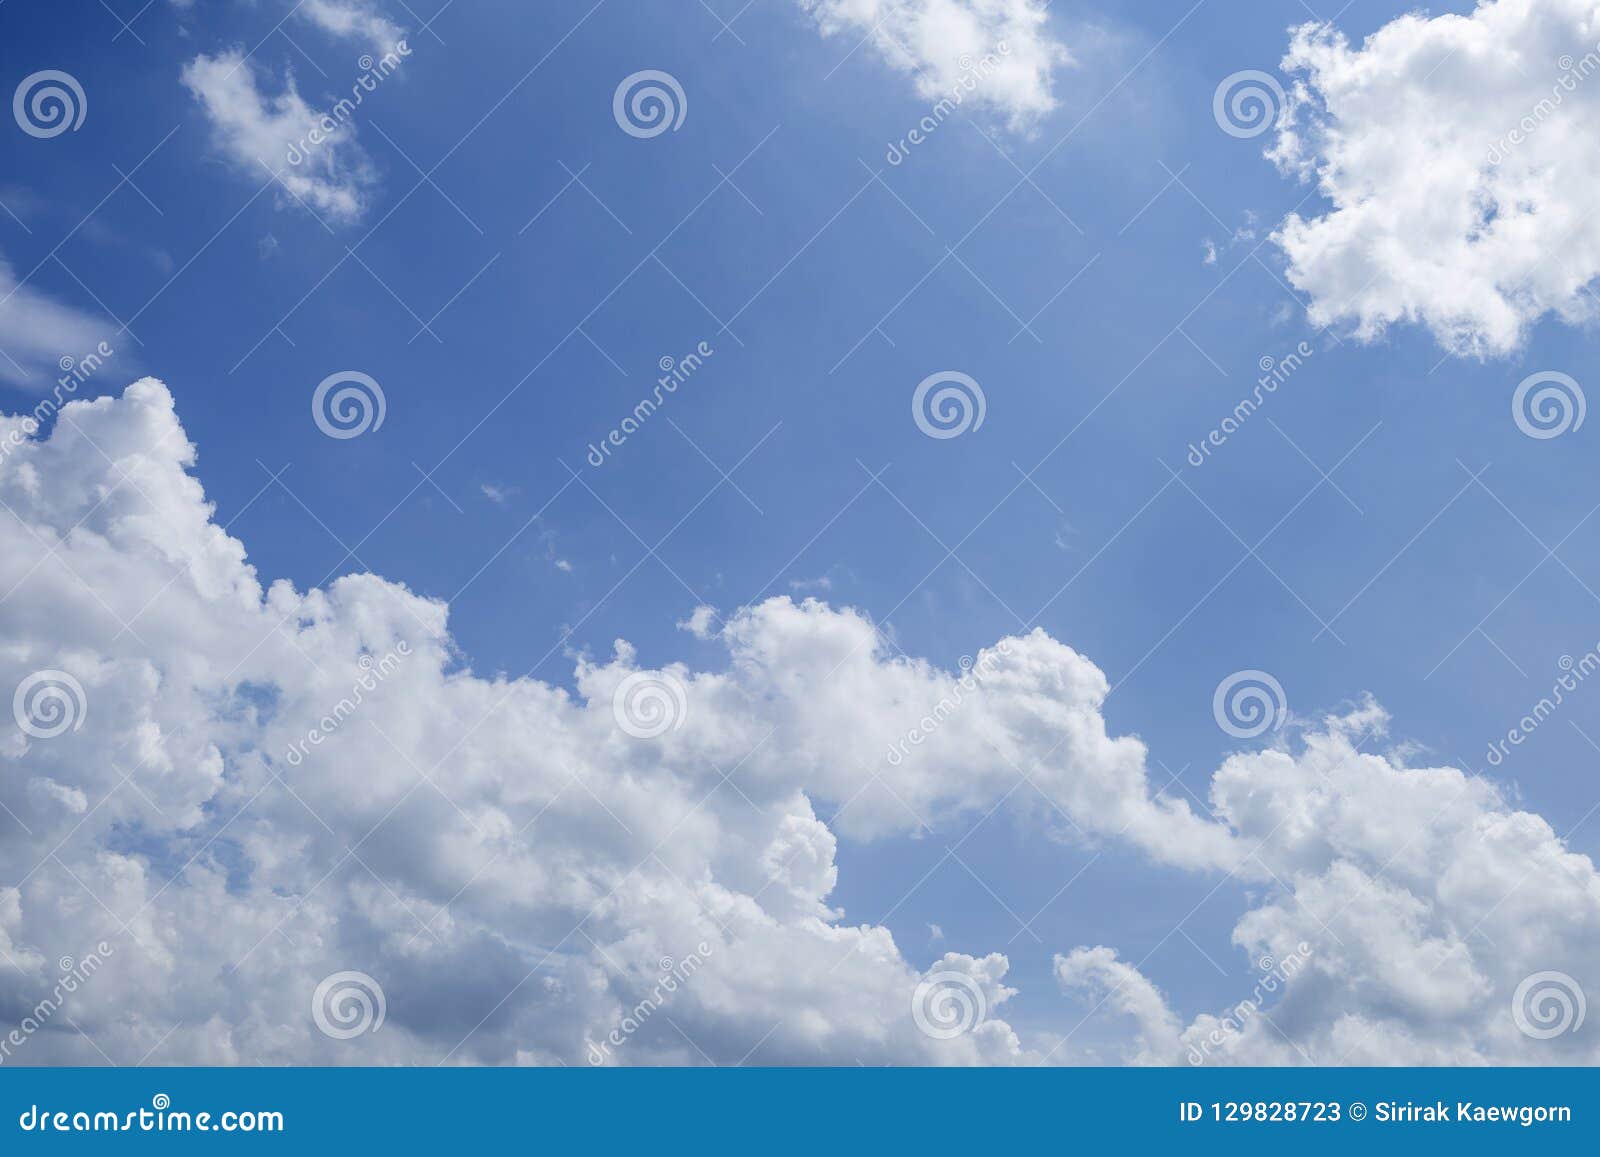 White Cloud Over Blue Sky, Summer Outdoor Day Light Stock Image - Image ...